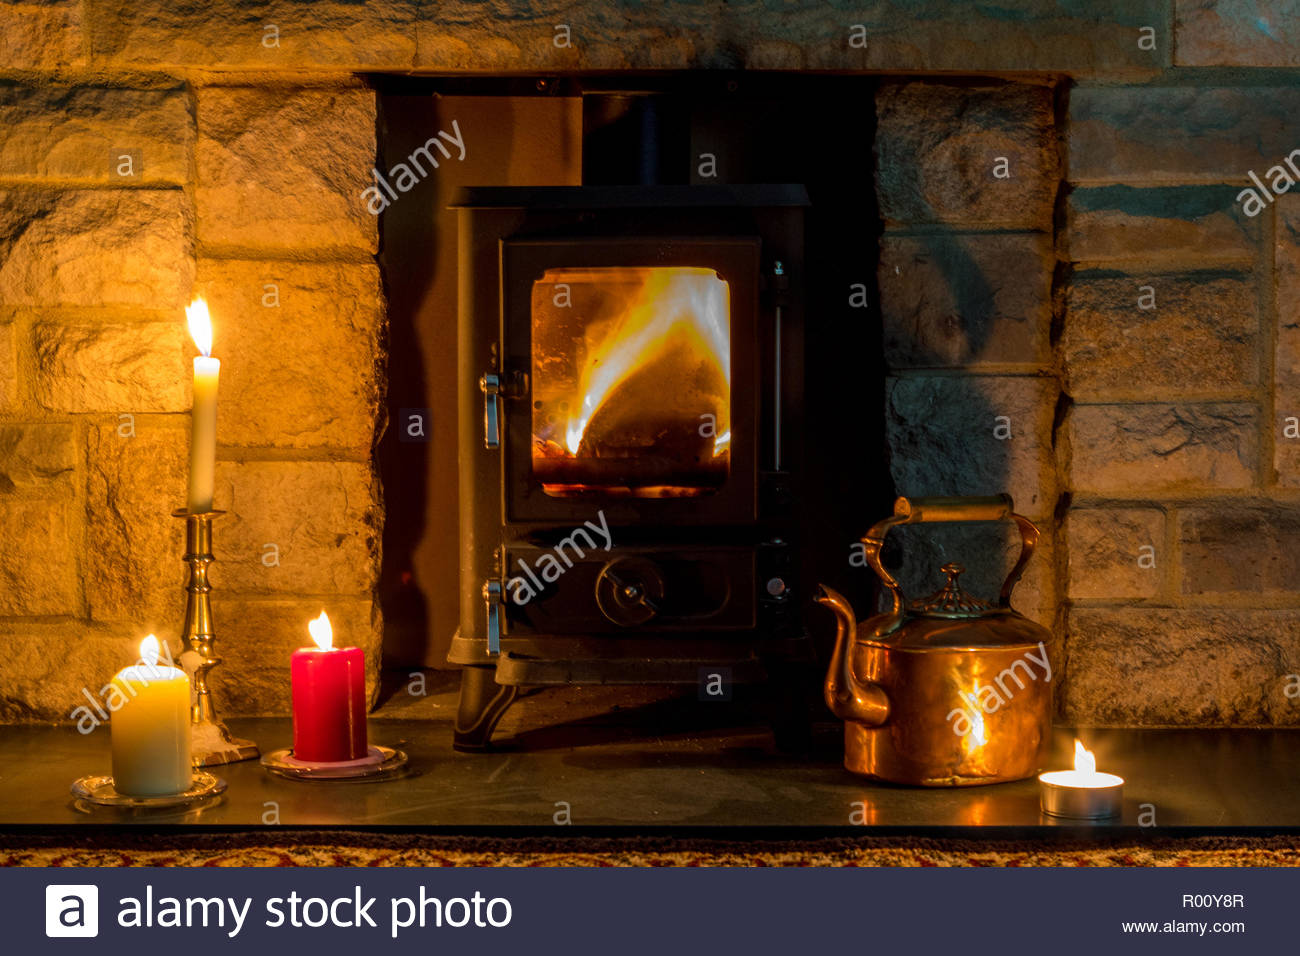 hygge concept a log burner candles and a copper kettle in a stone fireplace R00Y8R